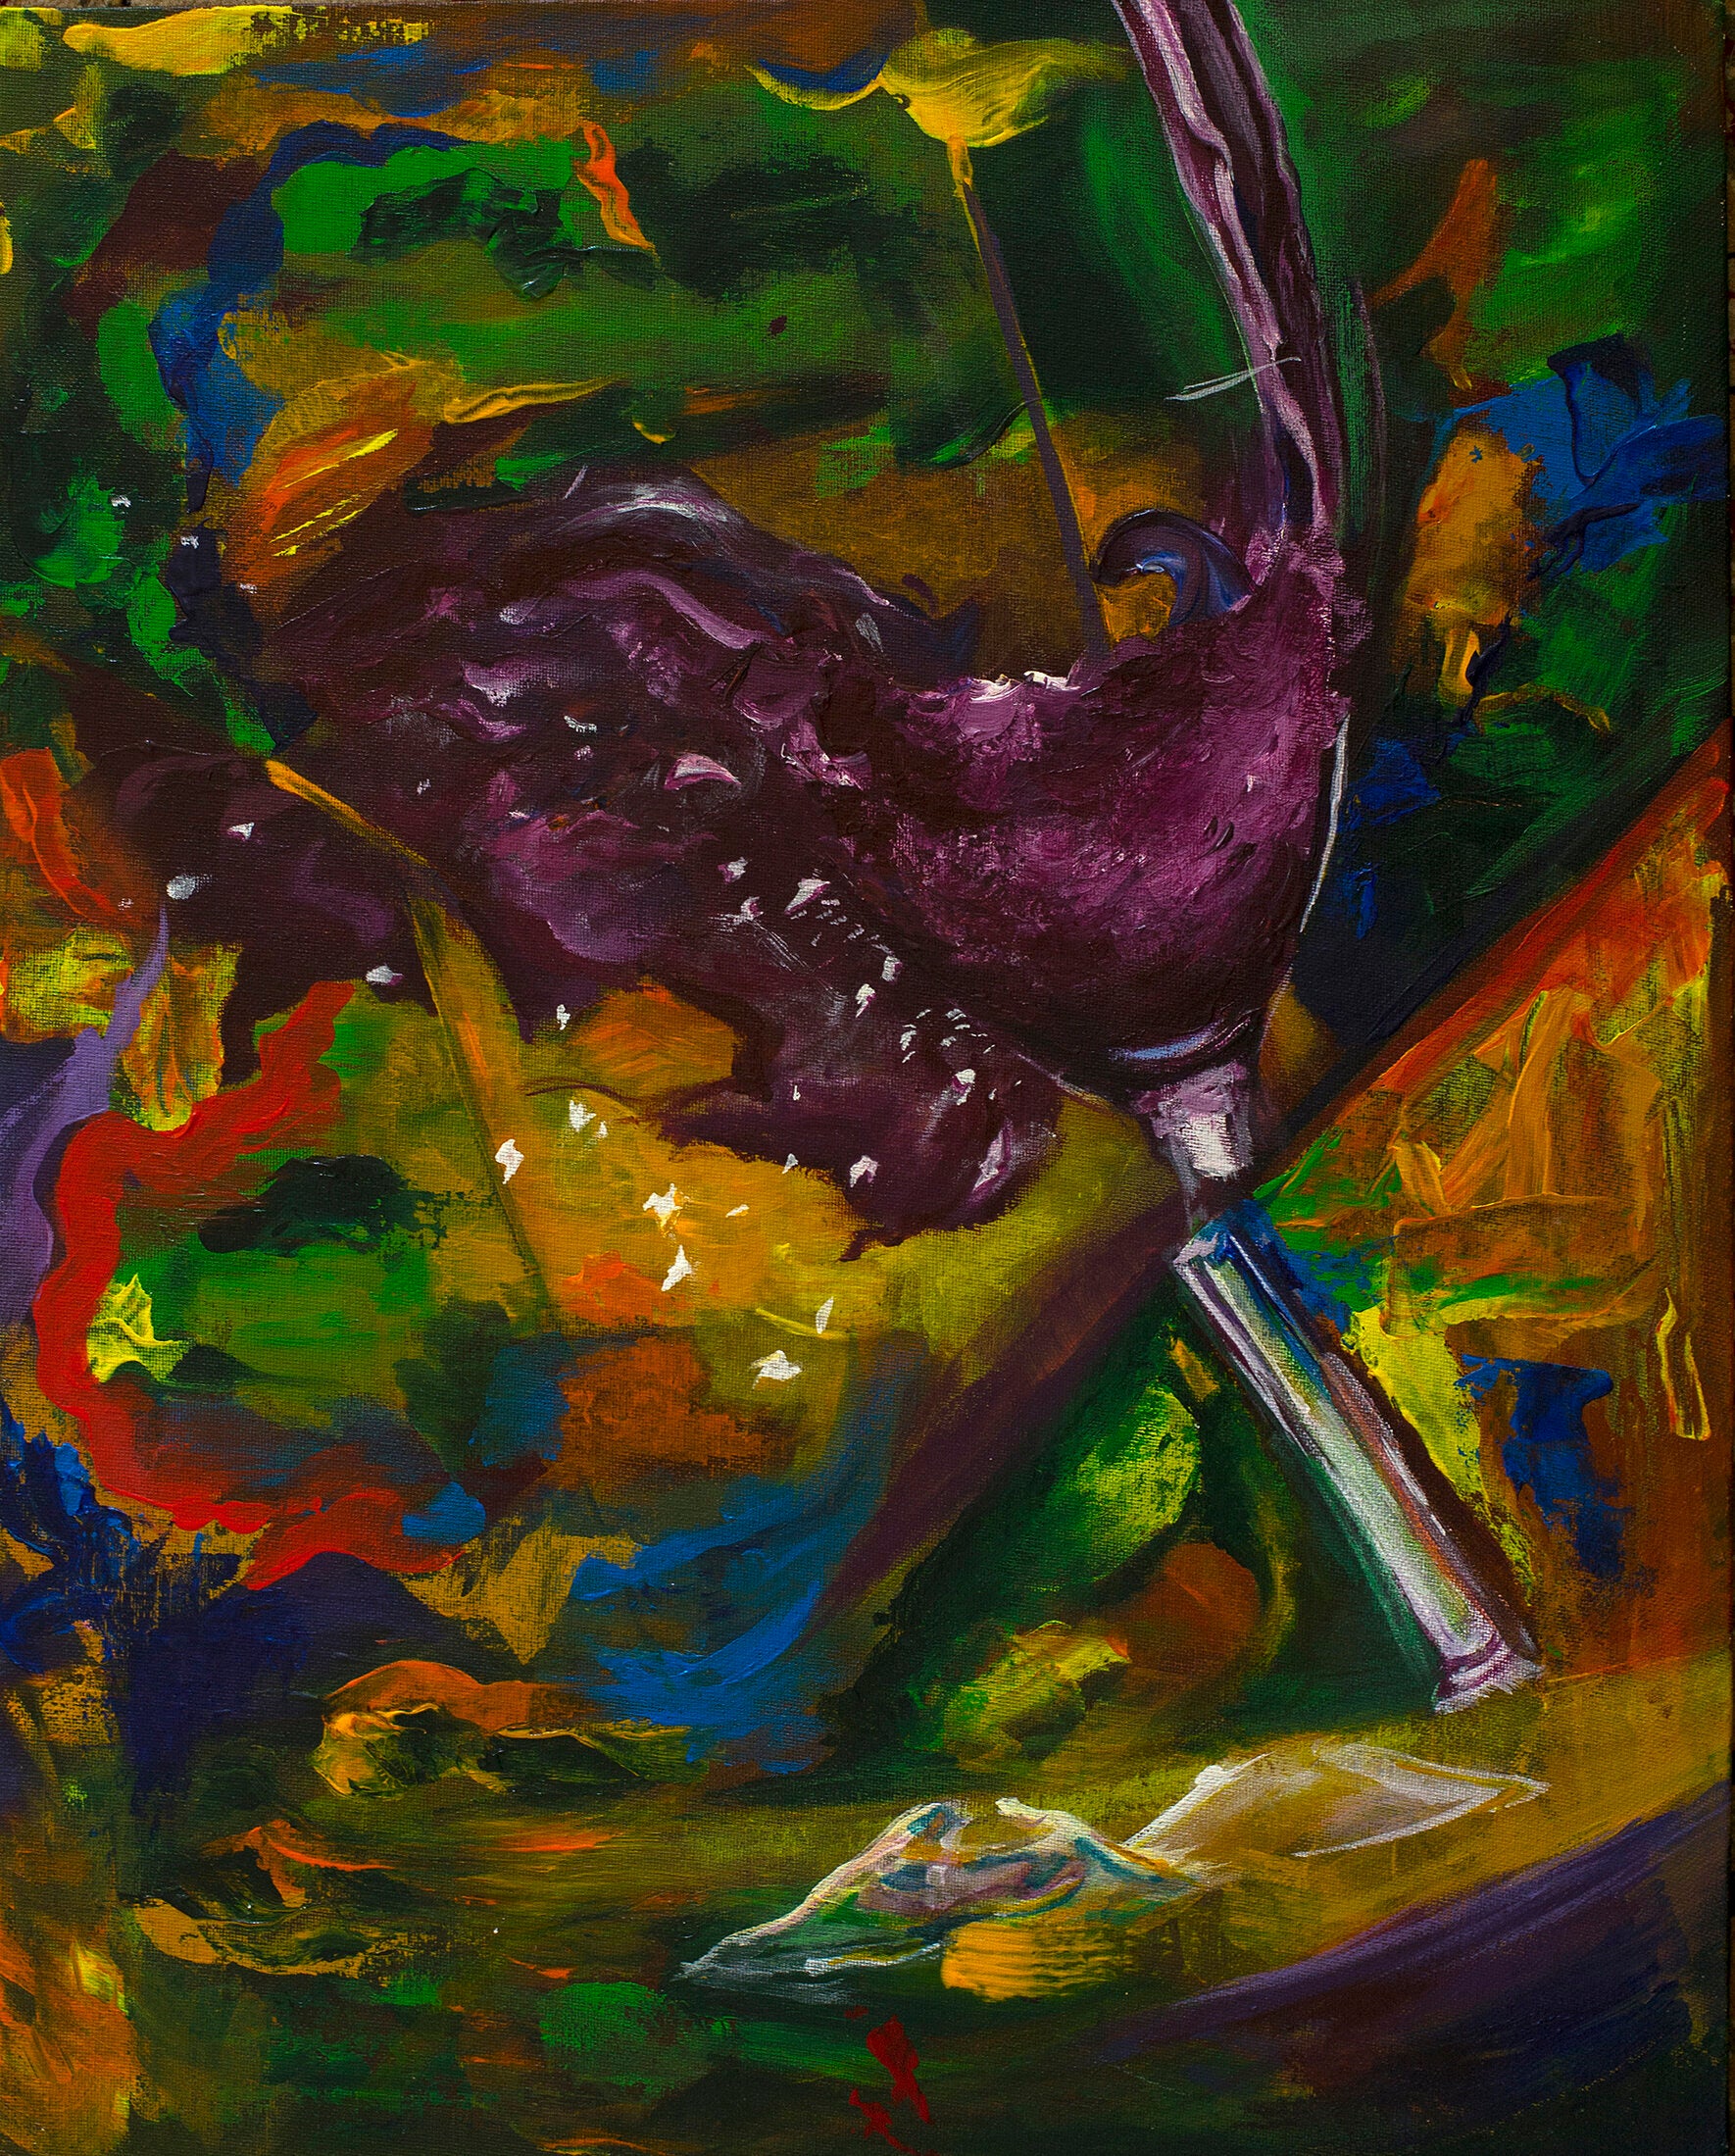 Painting of a broken wine glass against a muddied, colorful background.